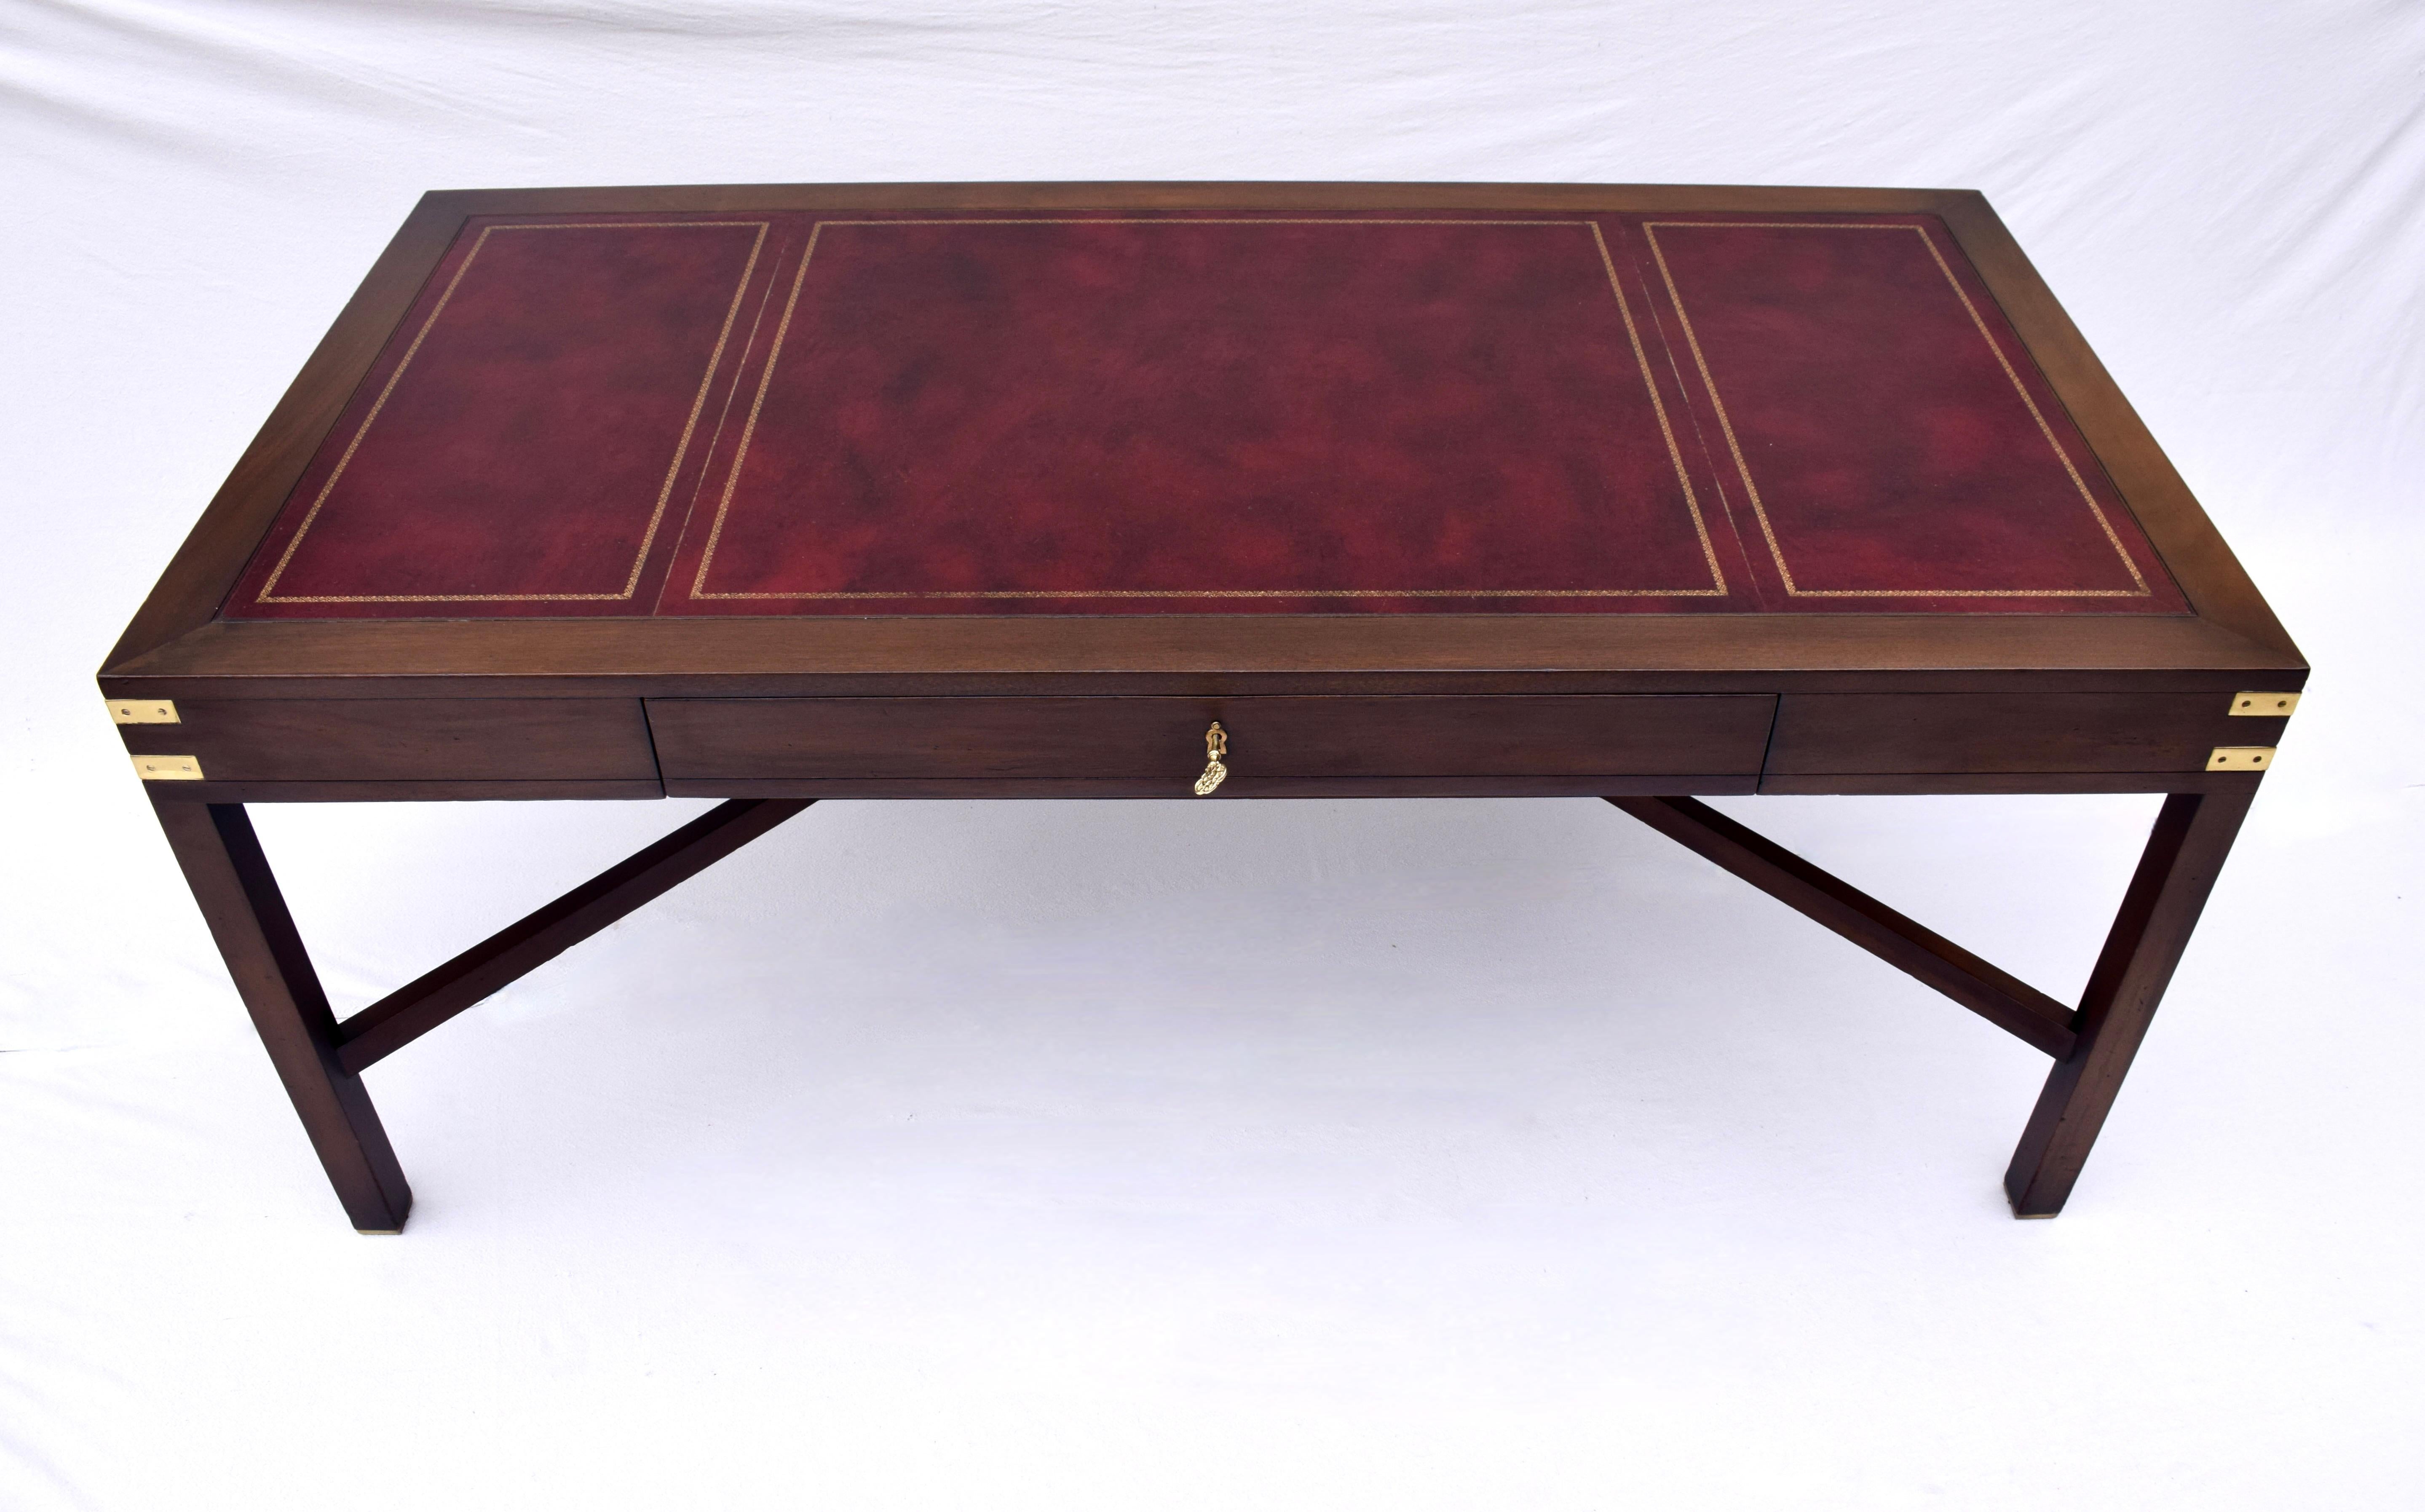 A limited edition walnut desk by Alex Stuart Designs in the Campaign style with tooled leather top, generous writing surface & a single felt lined drawer. Gorgeous lithe lines embellished with polished brass hardware, the desk is signed & numbered &